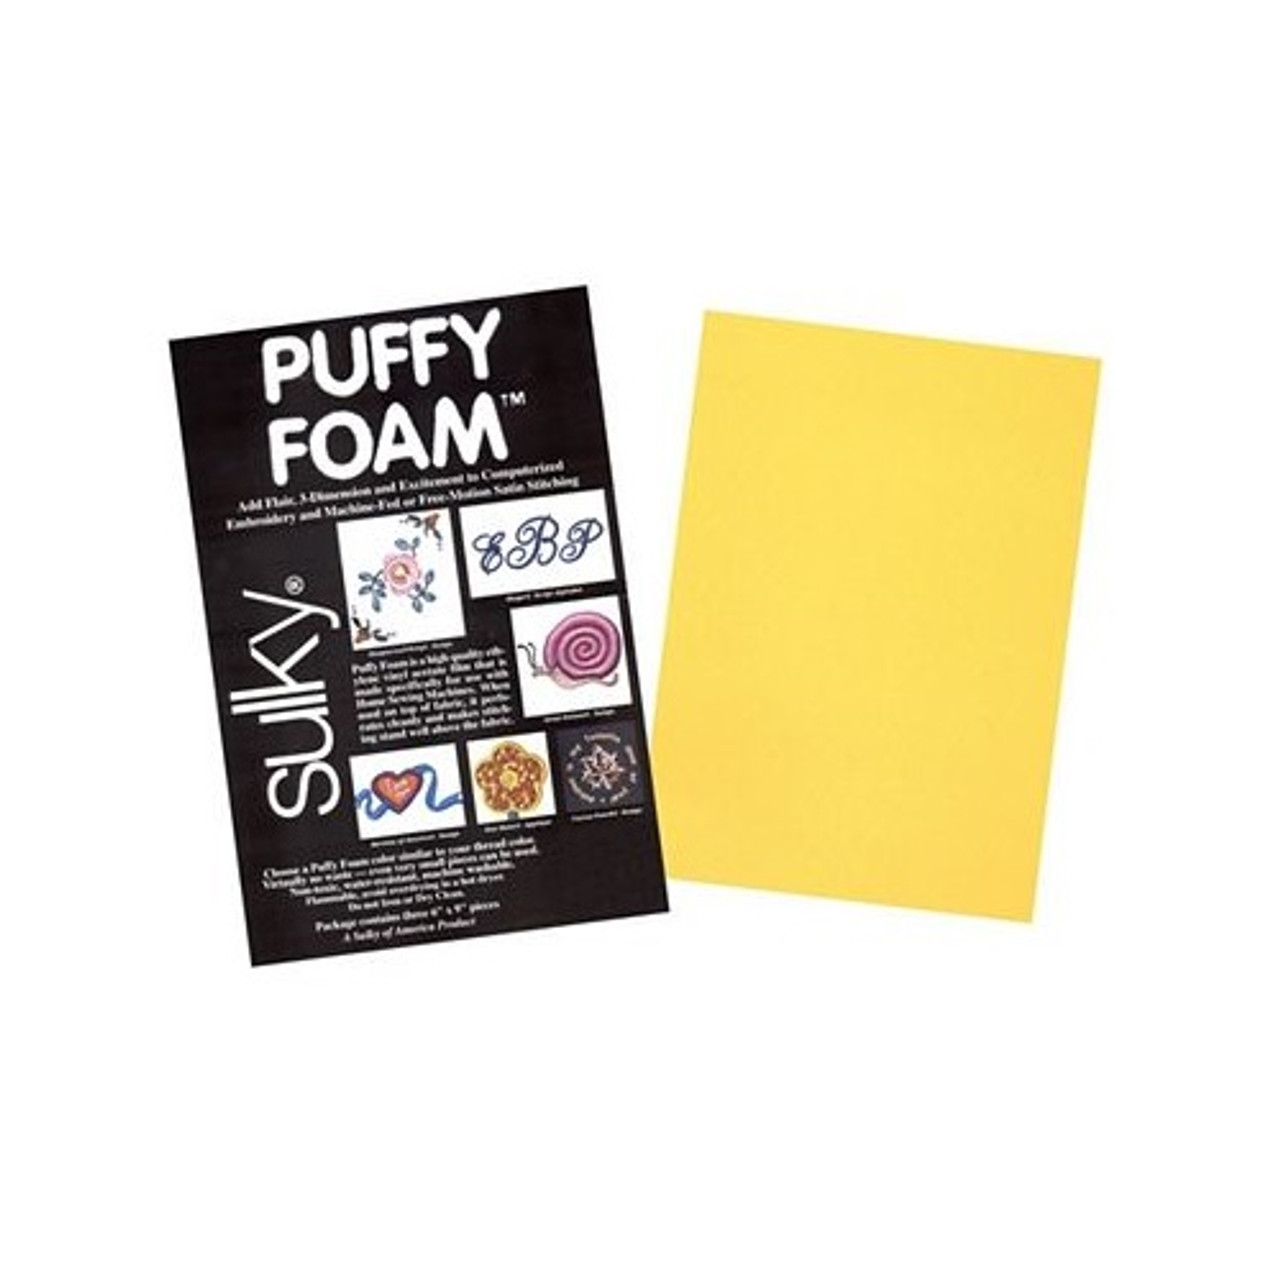 Yellow - Puffy Foam - Sulky
2mm
 9.25 inches x 6.25 inches
 3 Sheets per Pack